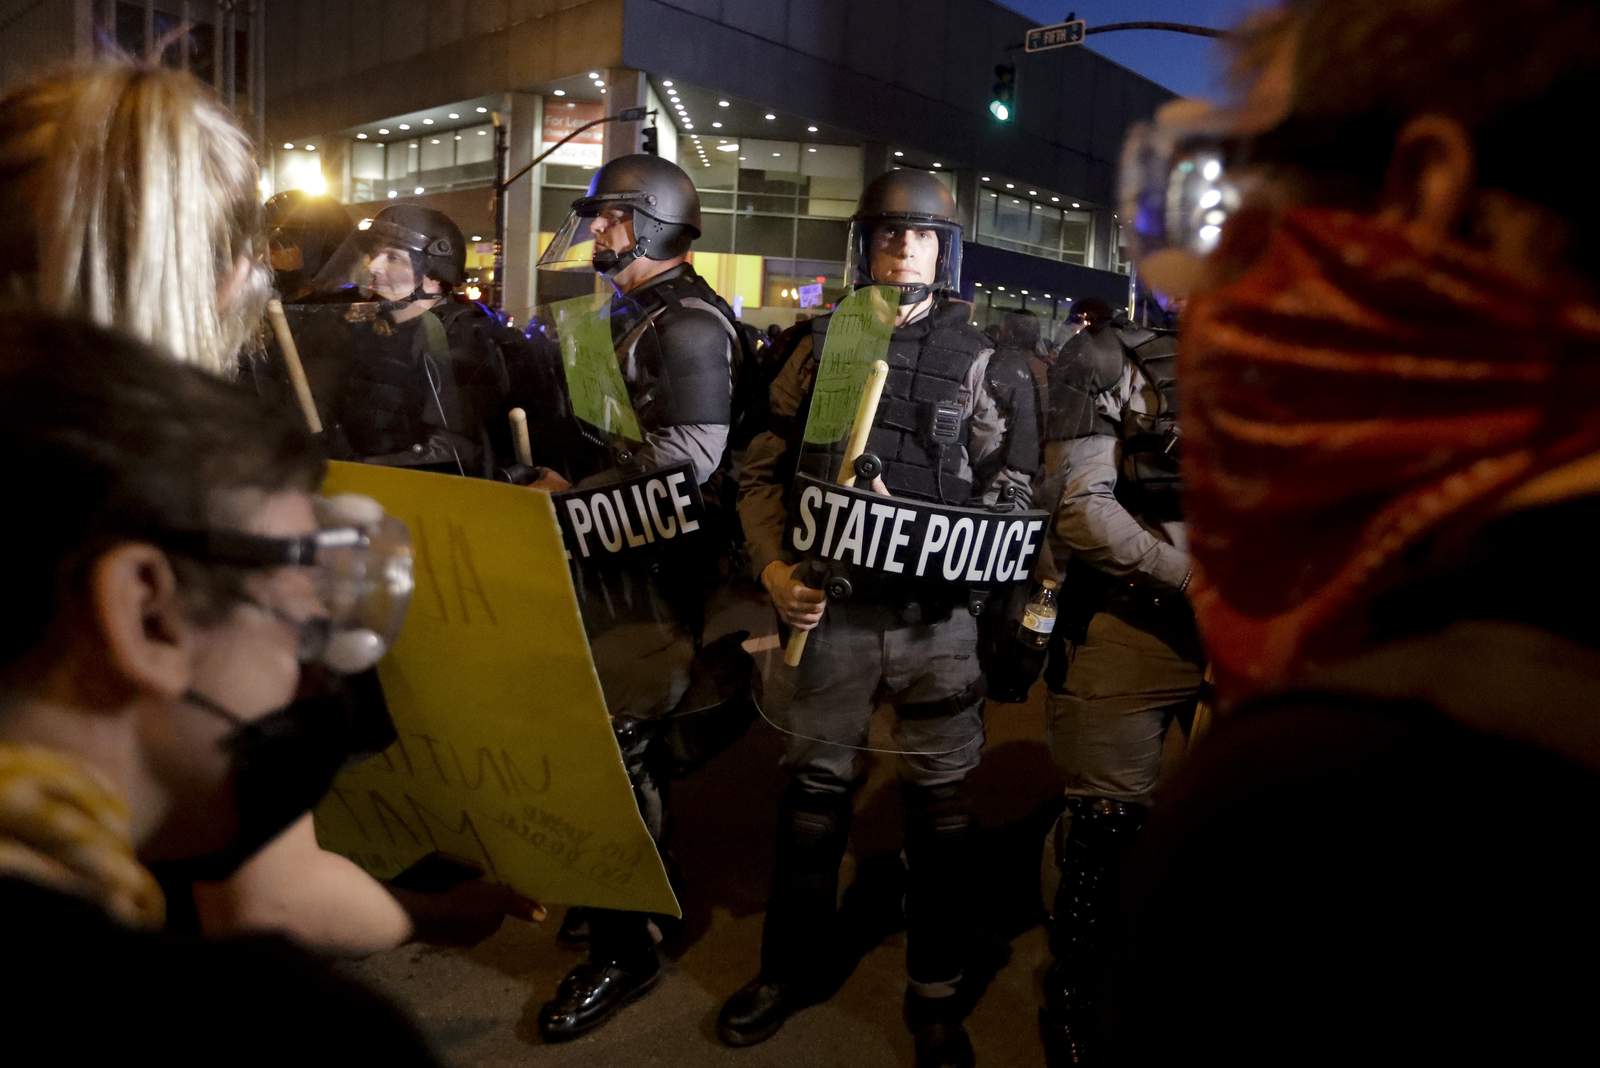 Louisville PD apologizes for targeting news crew at protest